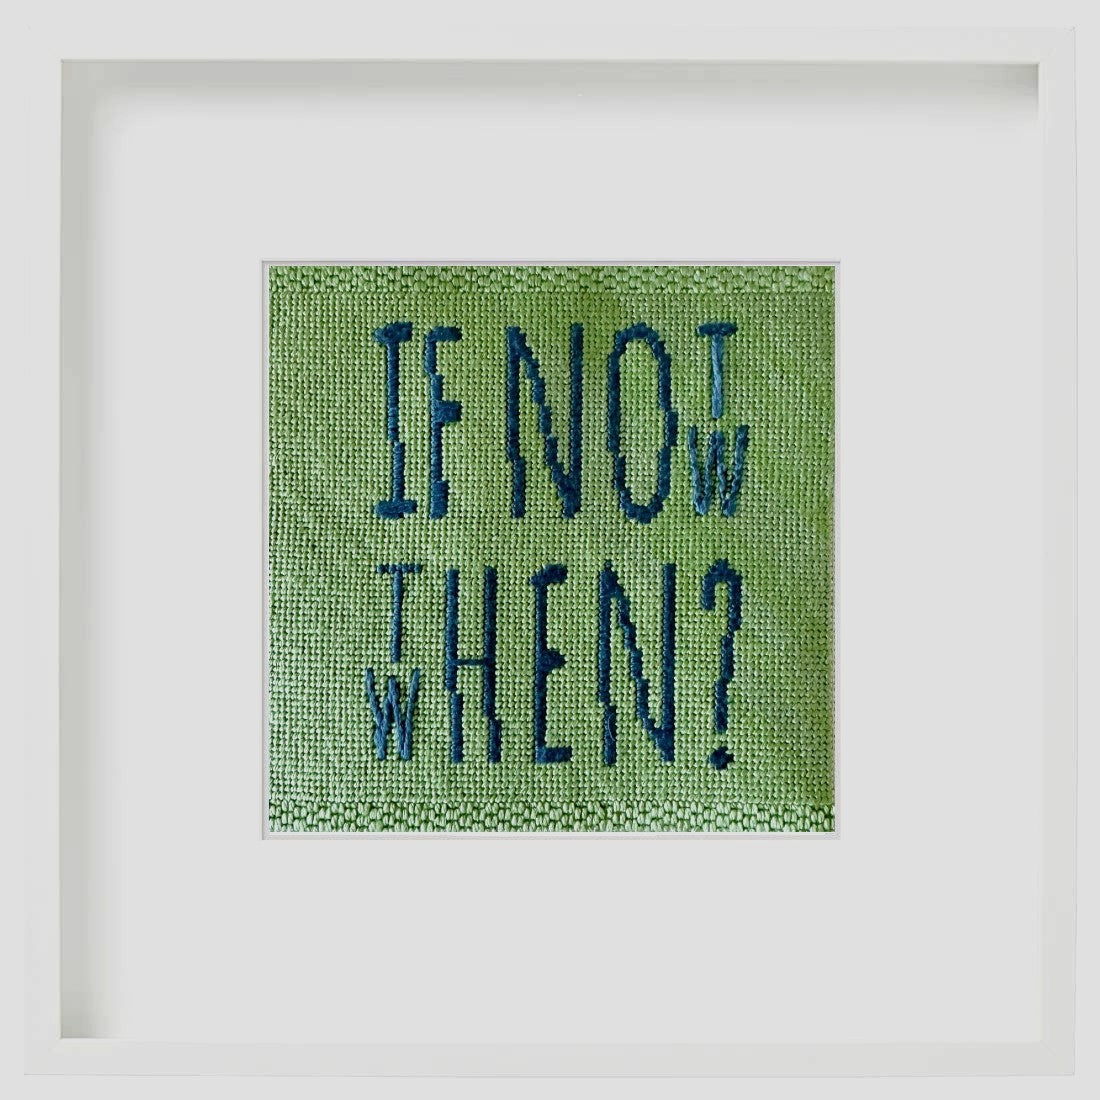 If Not Now Then When needlepoint design.